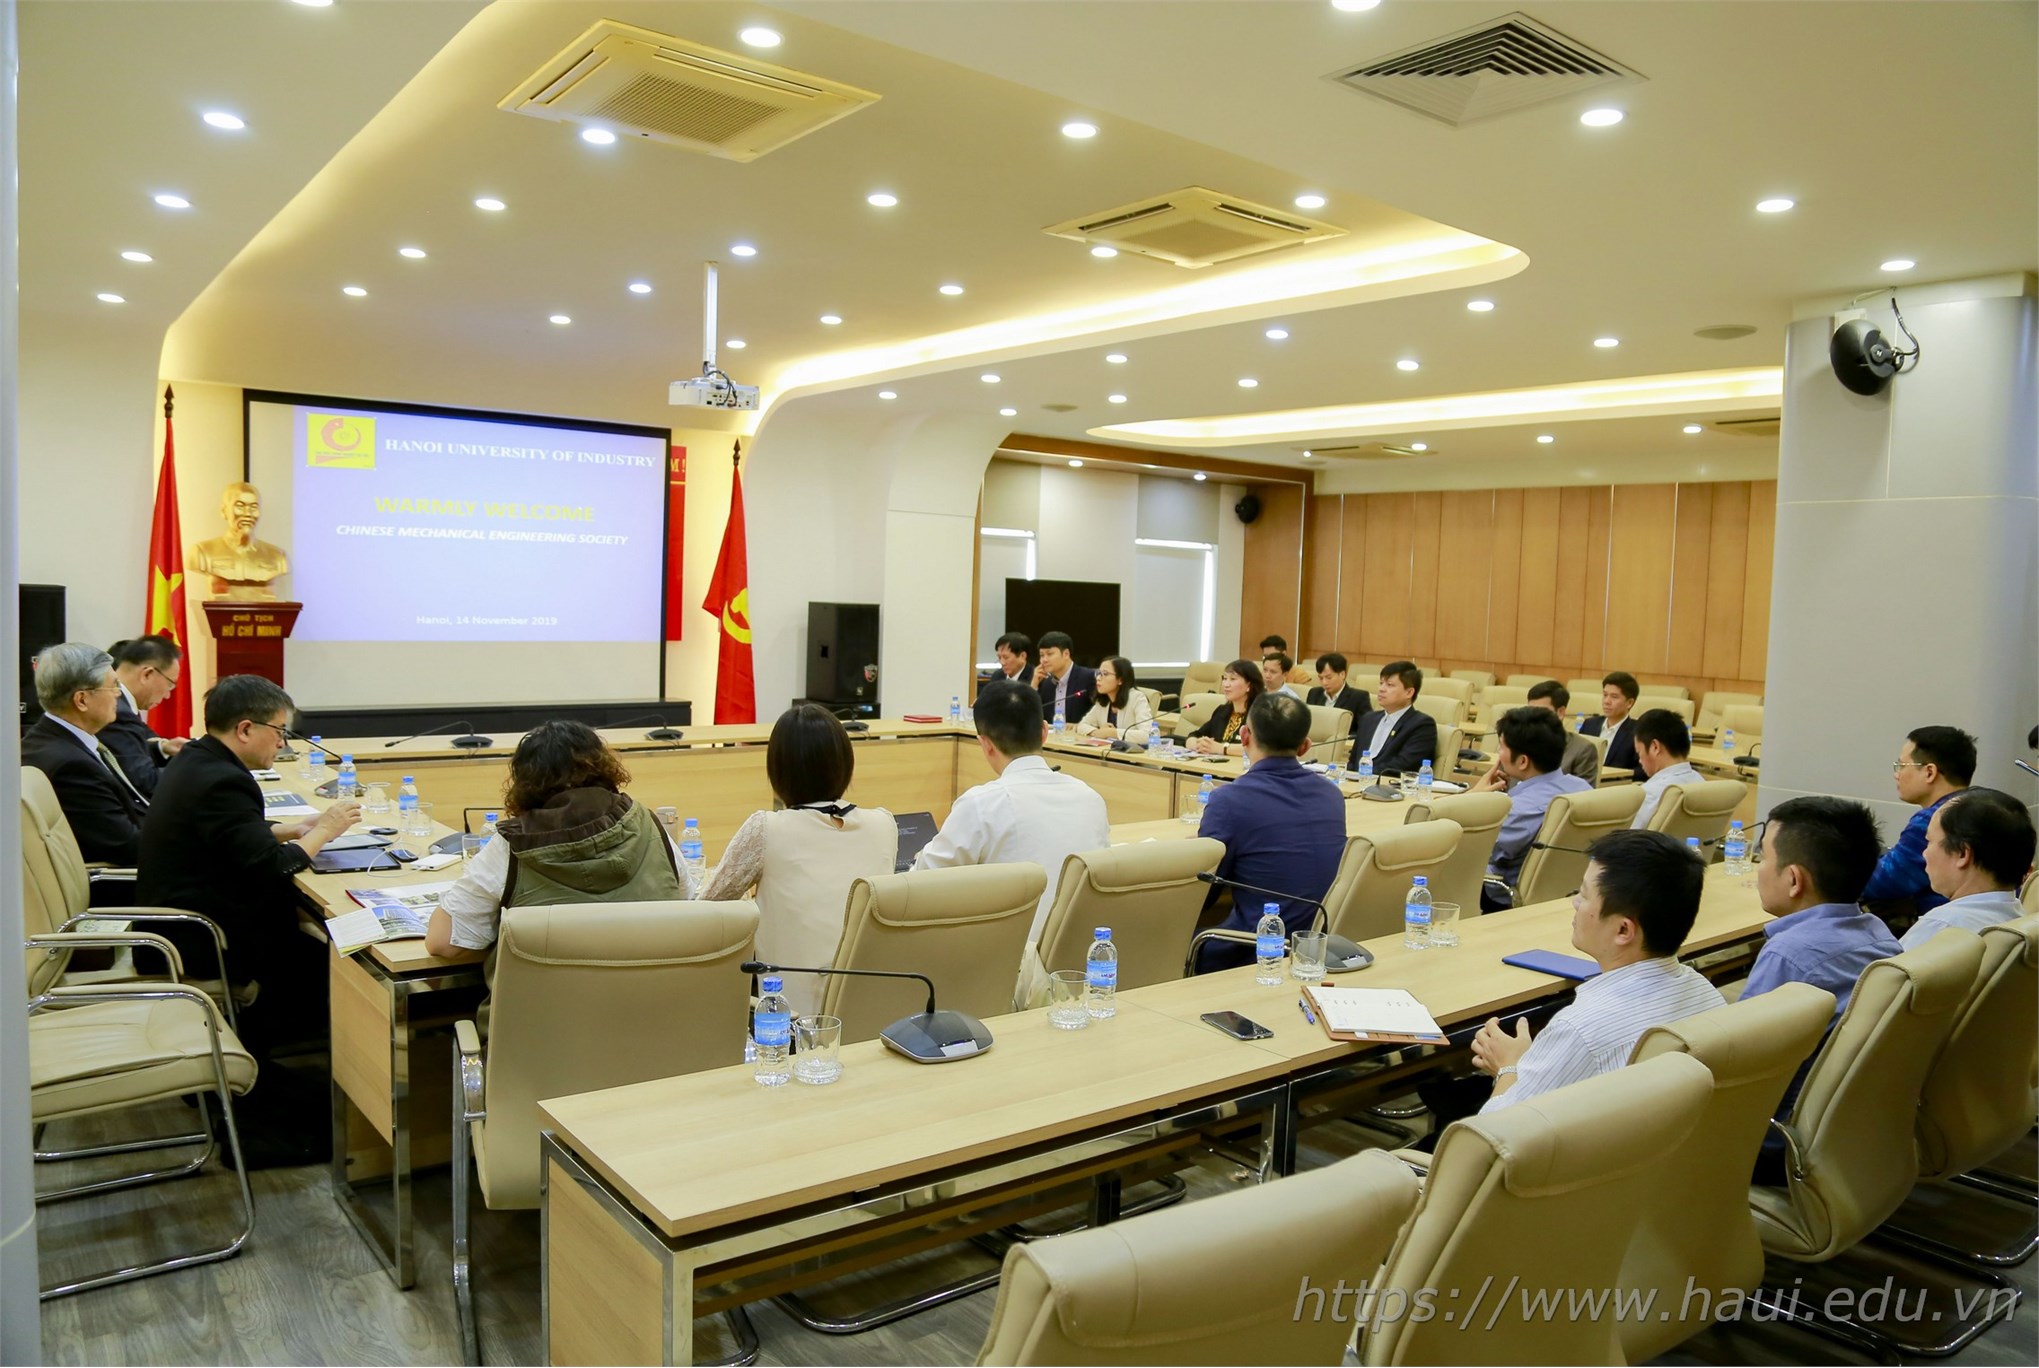 Delegation of Chinese Mechanical Engineering Society paid a working visit to Hanoi University of Industry